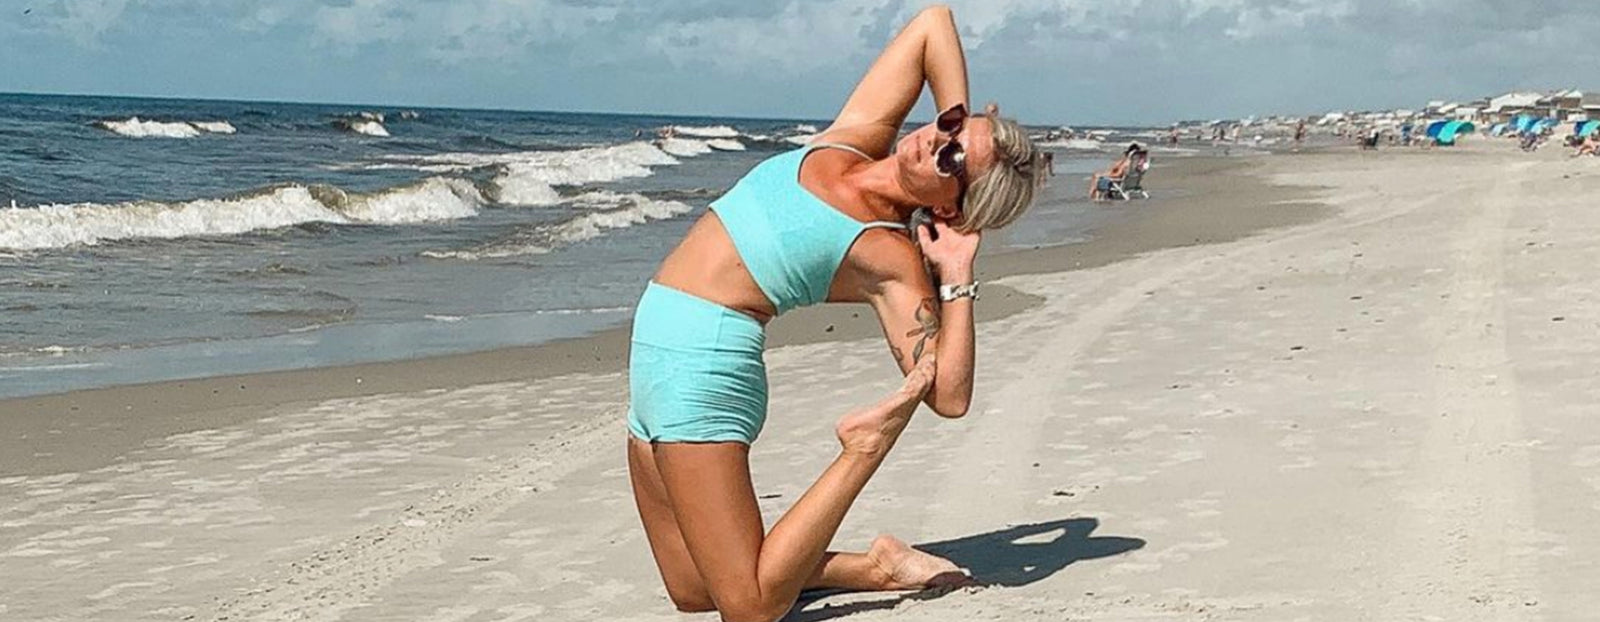 Meet FRÉ Ambassador Ruth Steel, Yoga Instructor & Mom-to-be